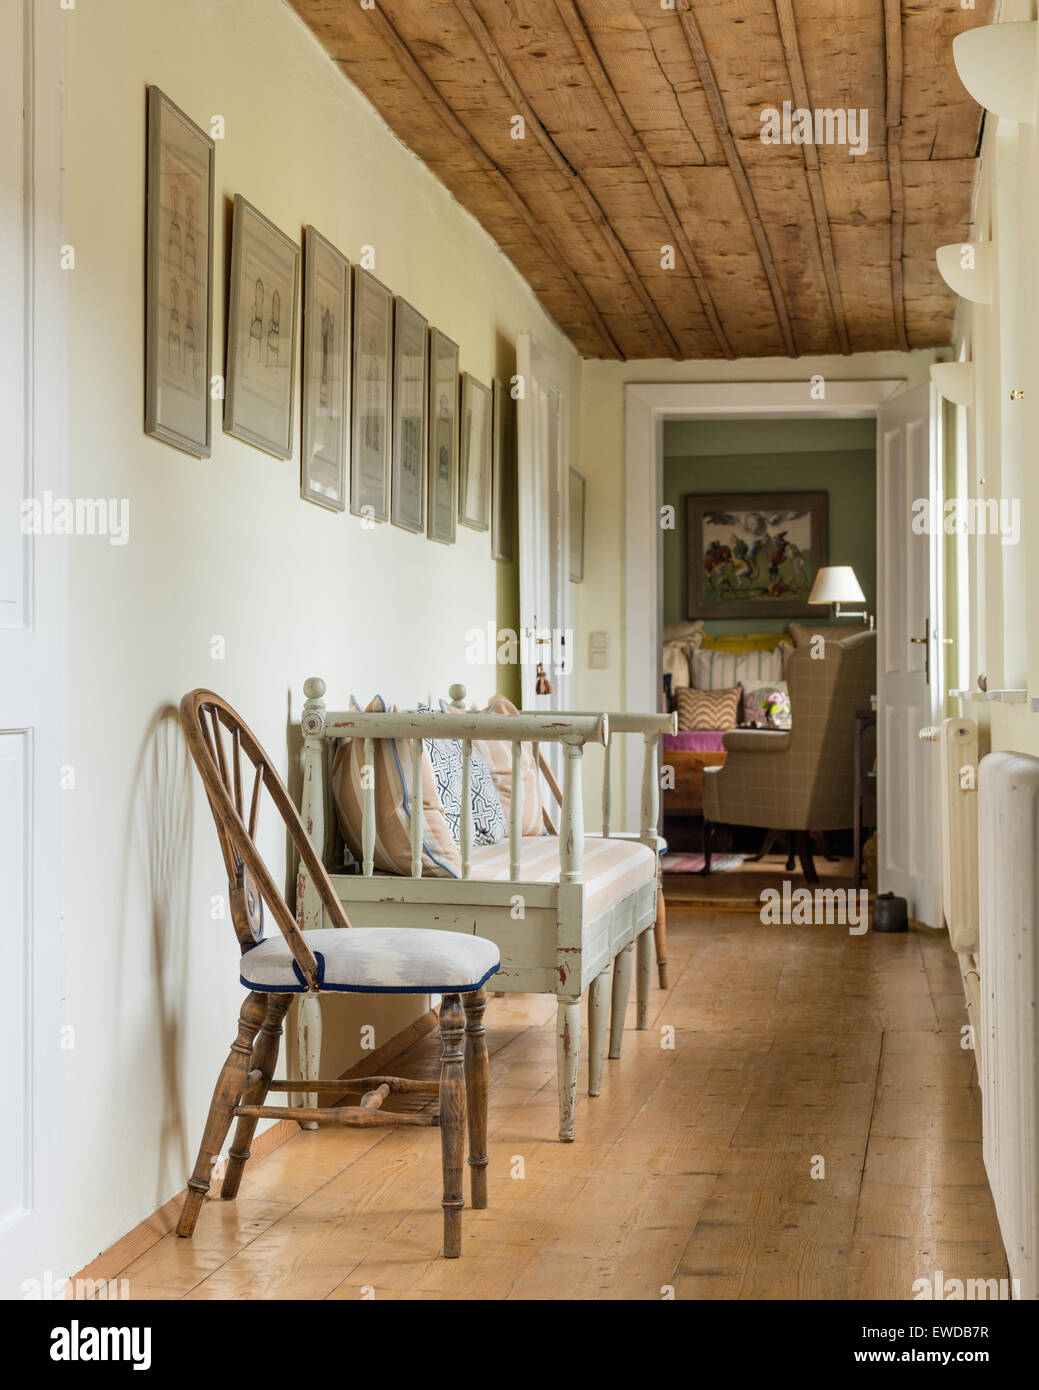 Scandinavian bench in corridor with wheelback chairs and french wall prints Stock Photo